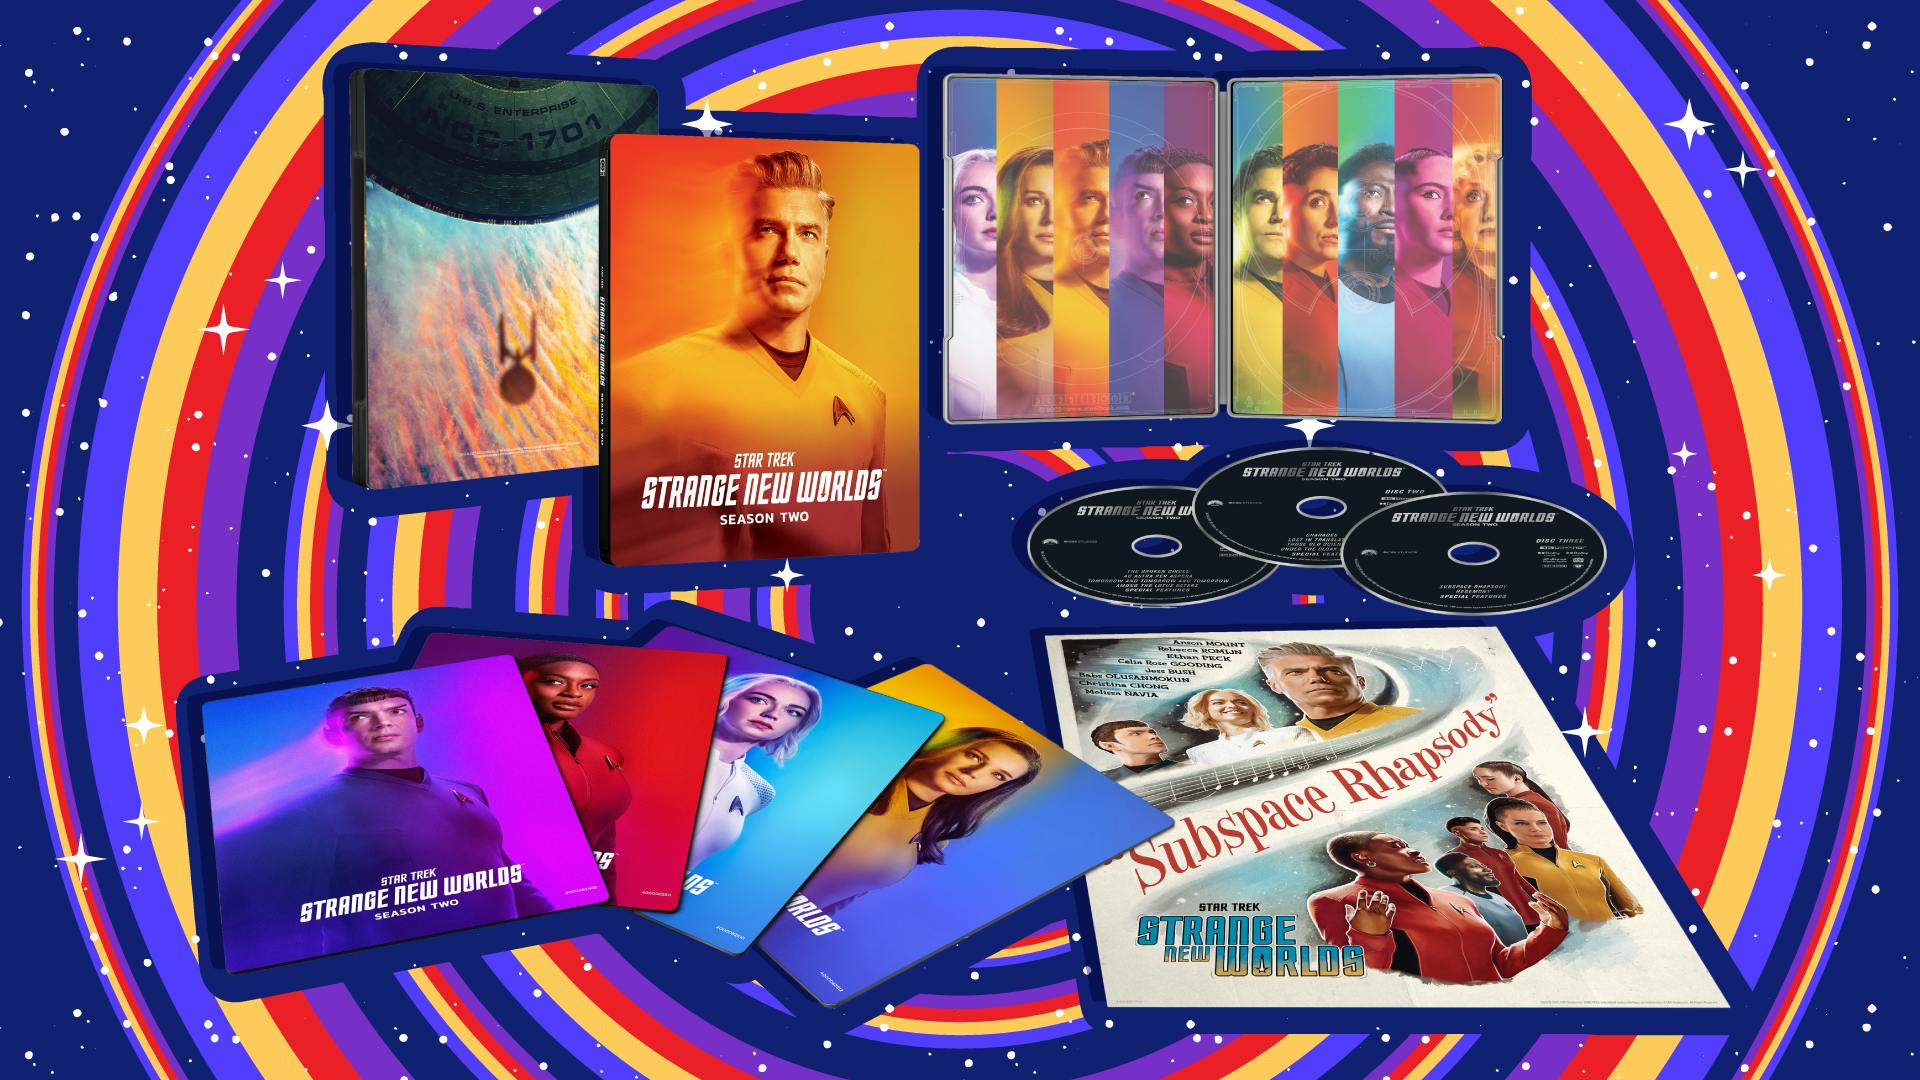 Stylized image of the Star Trek: Strange New Worlds Season 2 home entertainment release with its exclusive bonus items